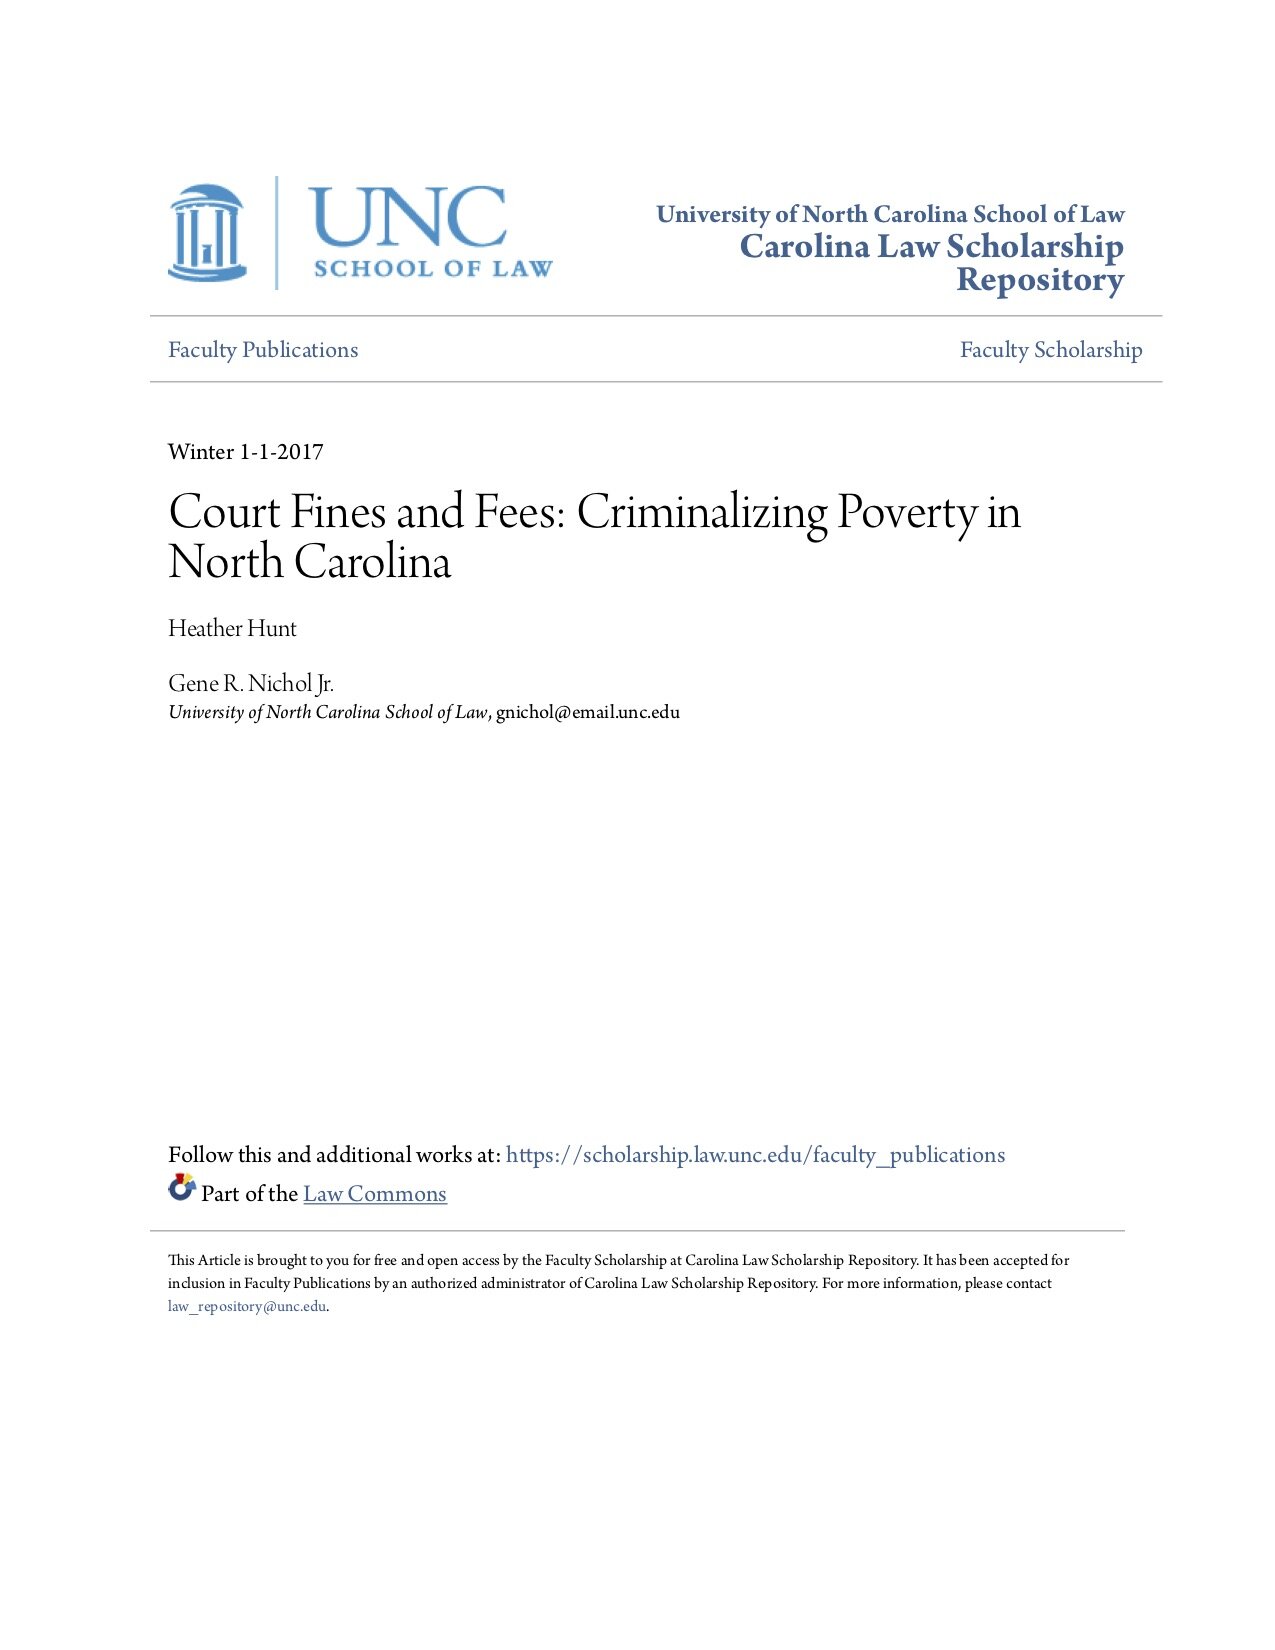 Court Fines and Fees Criminalizing Poverty in North Carolina